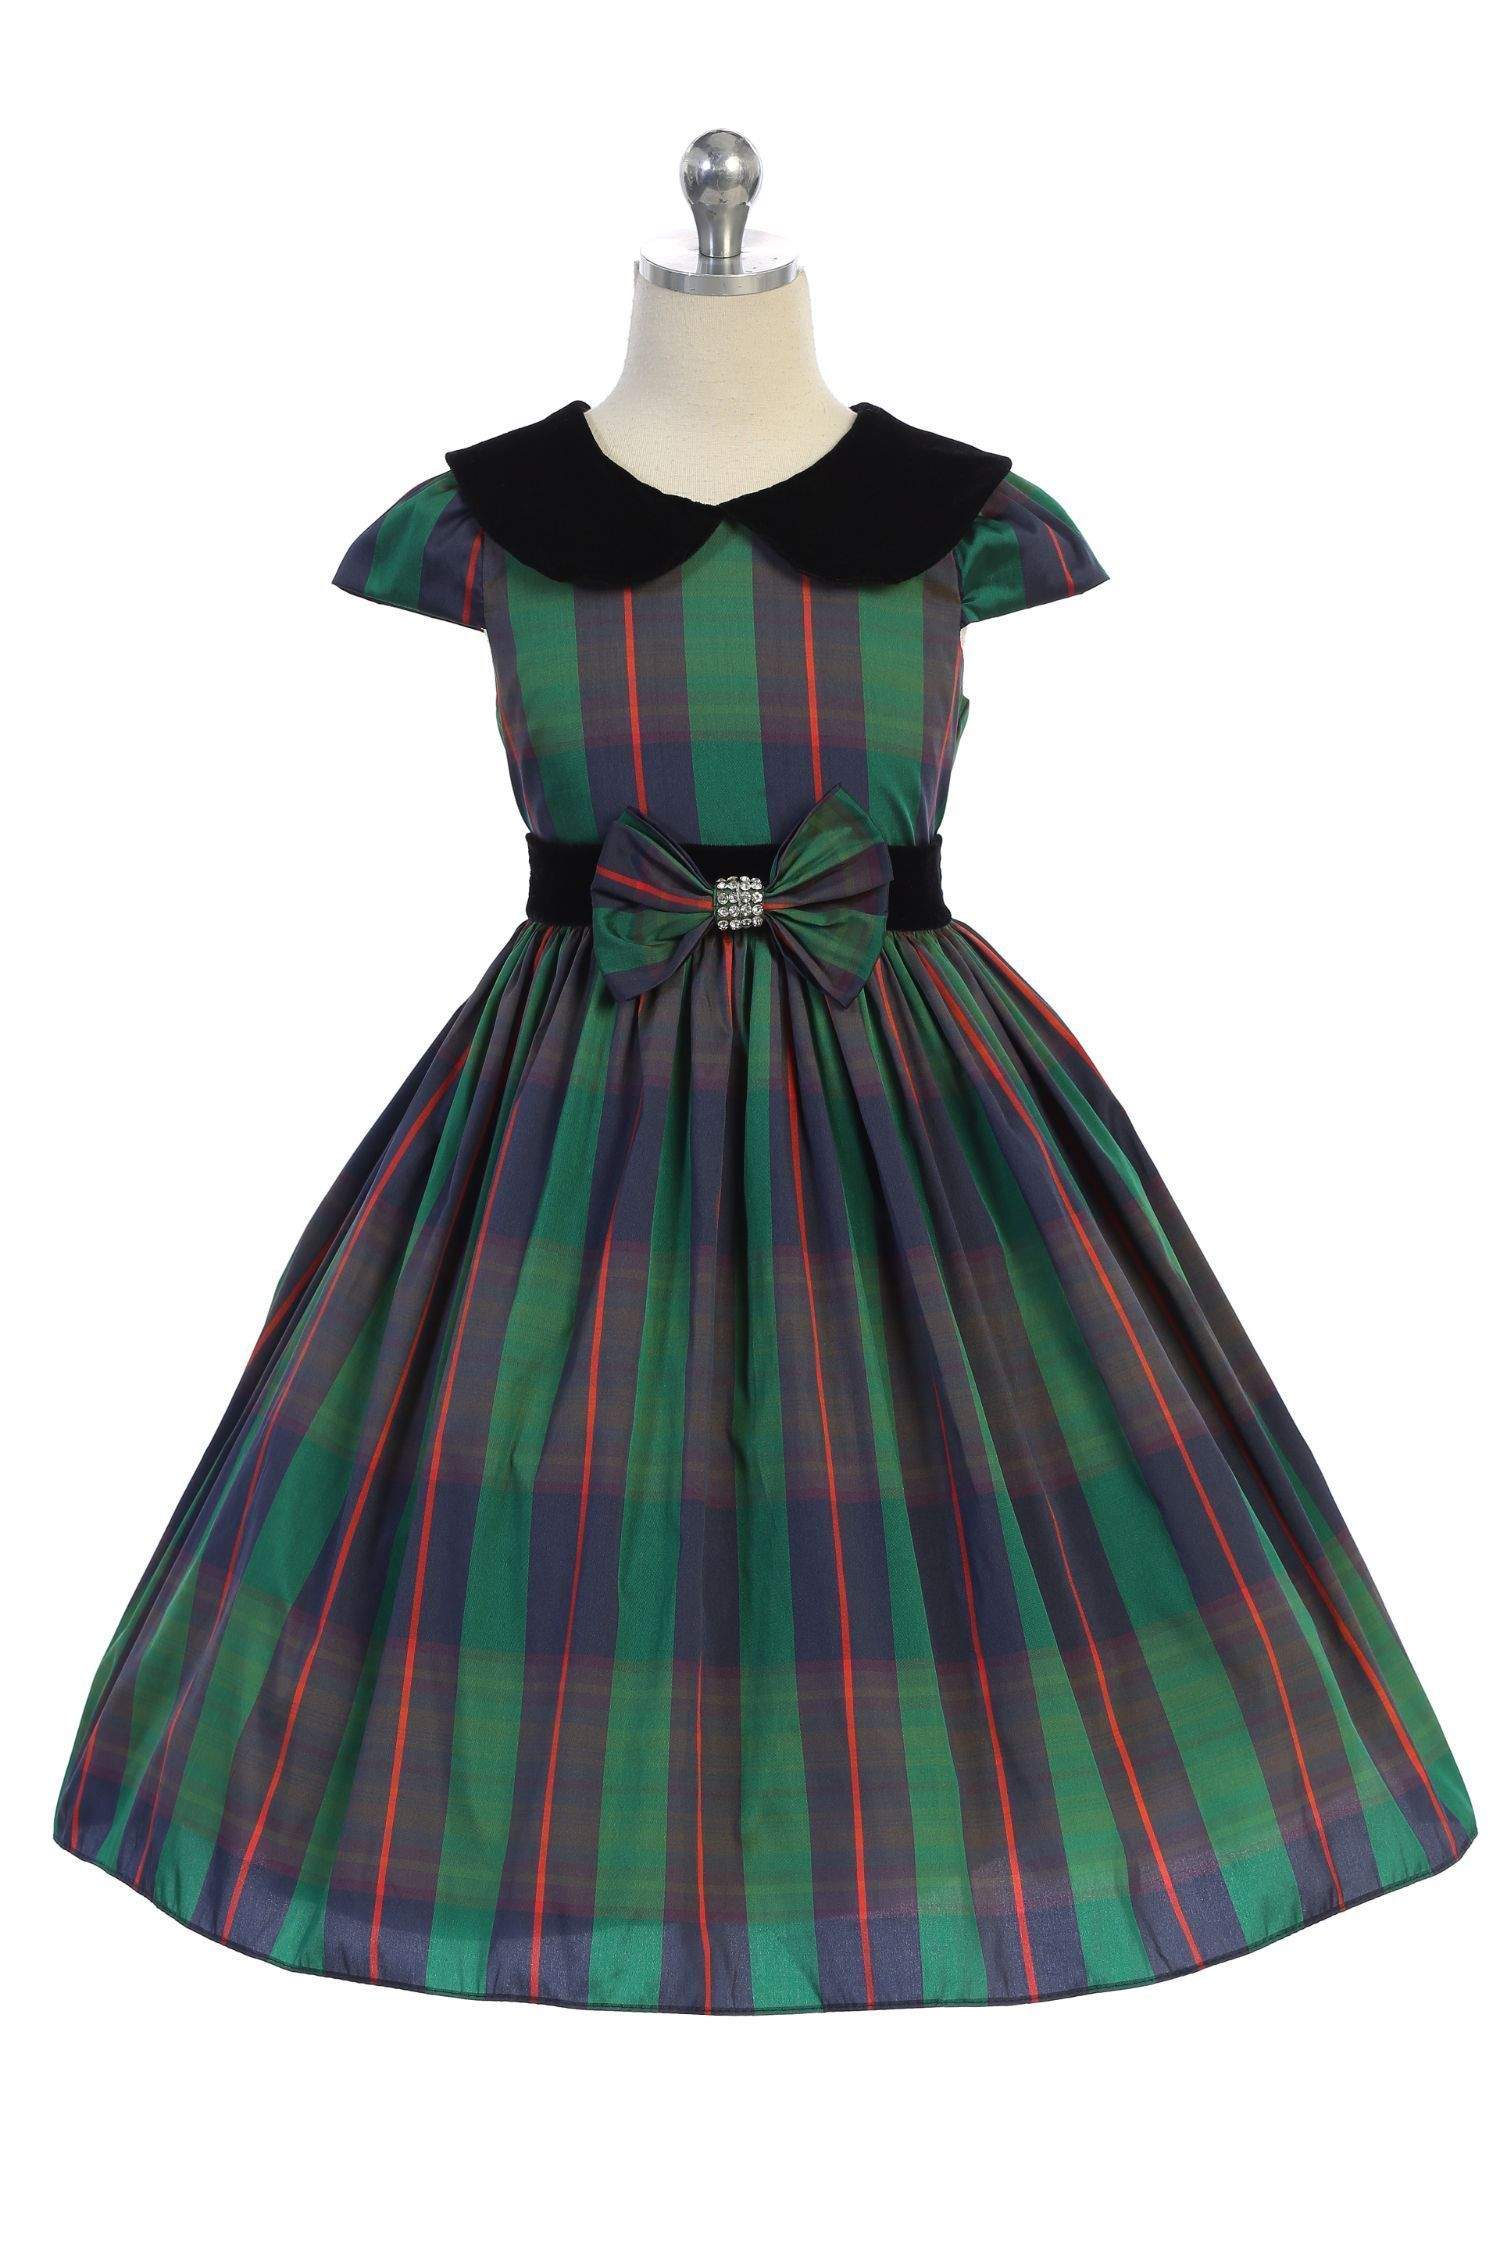 Classic Plaid with Velvet Collar Plus Size Girl Dress-Kid's Dream-Color_Green,Color_Red,girl-dress,length_Knee Length,meta-related-collection-shop-the-outfit-girls,size _18.5,size_14.5,size_16.5,size_20.5